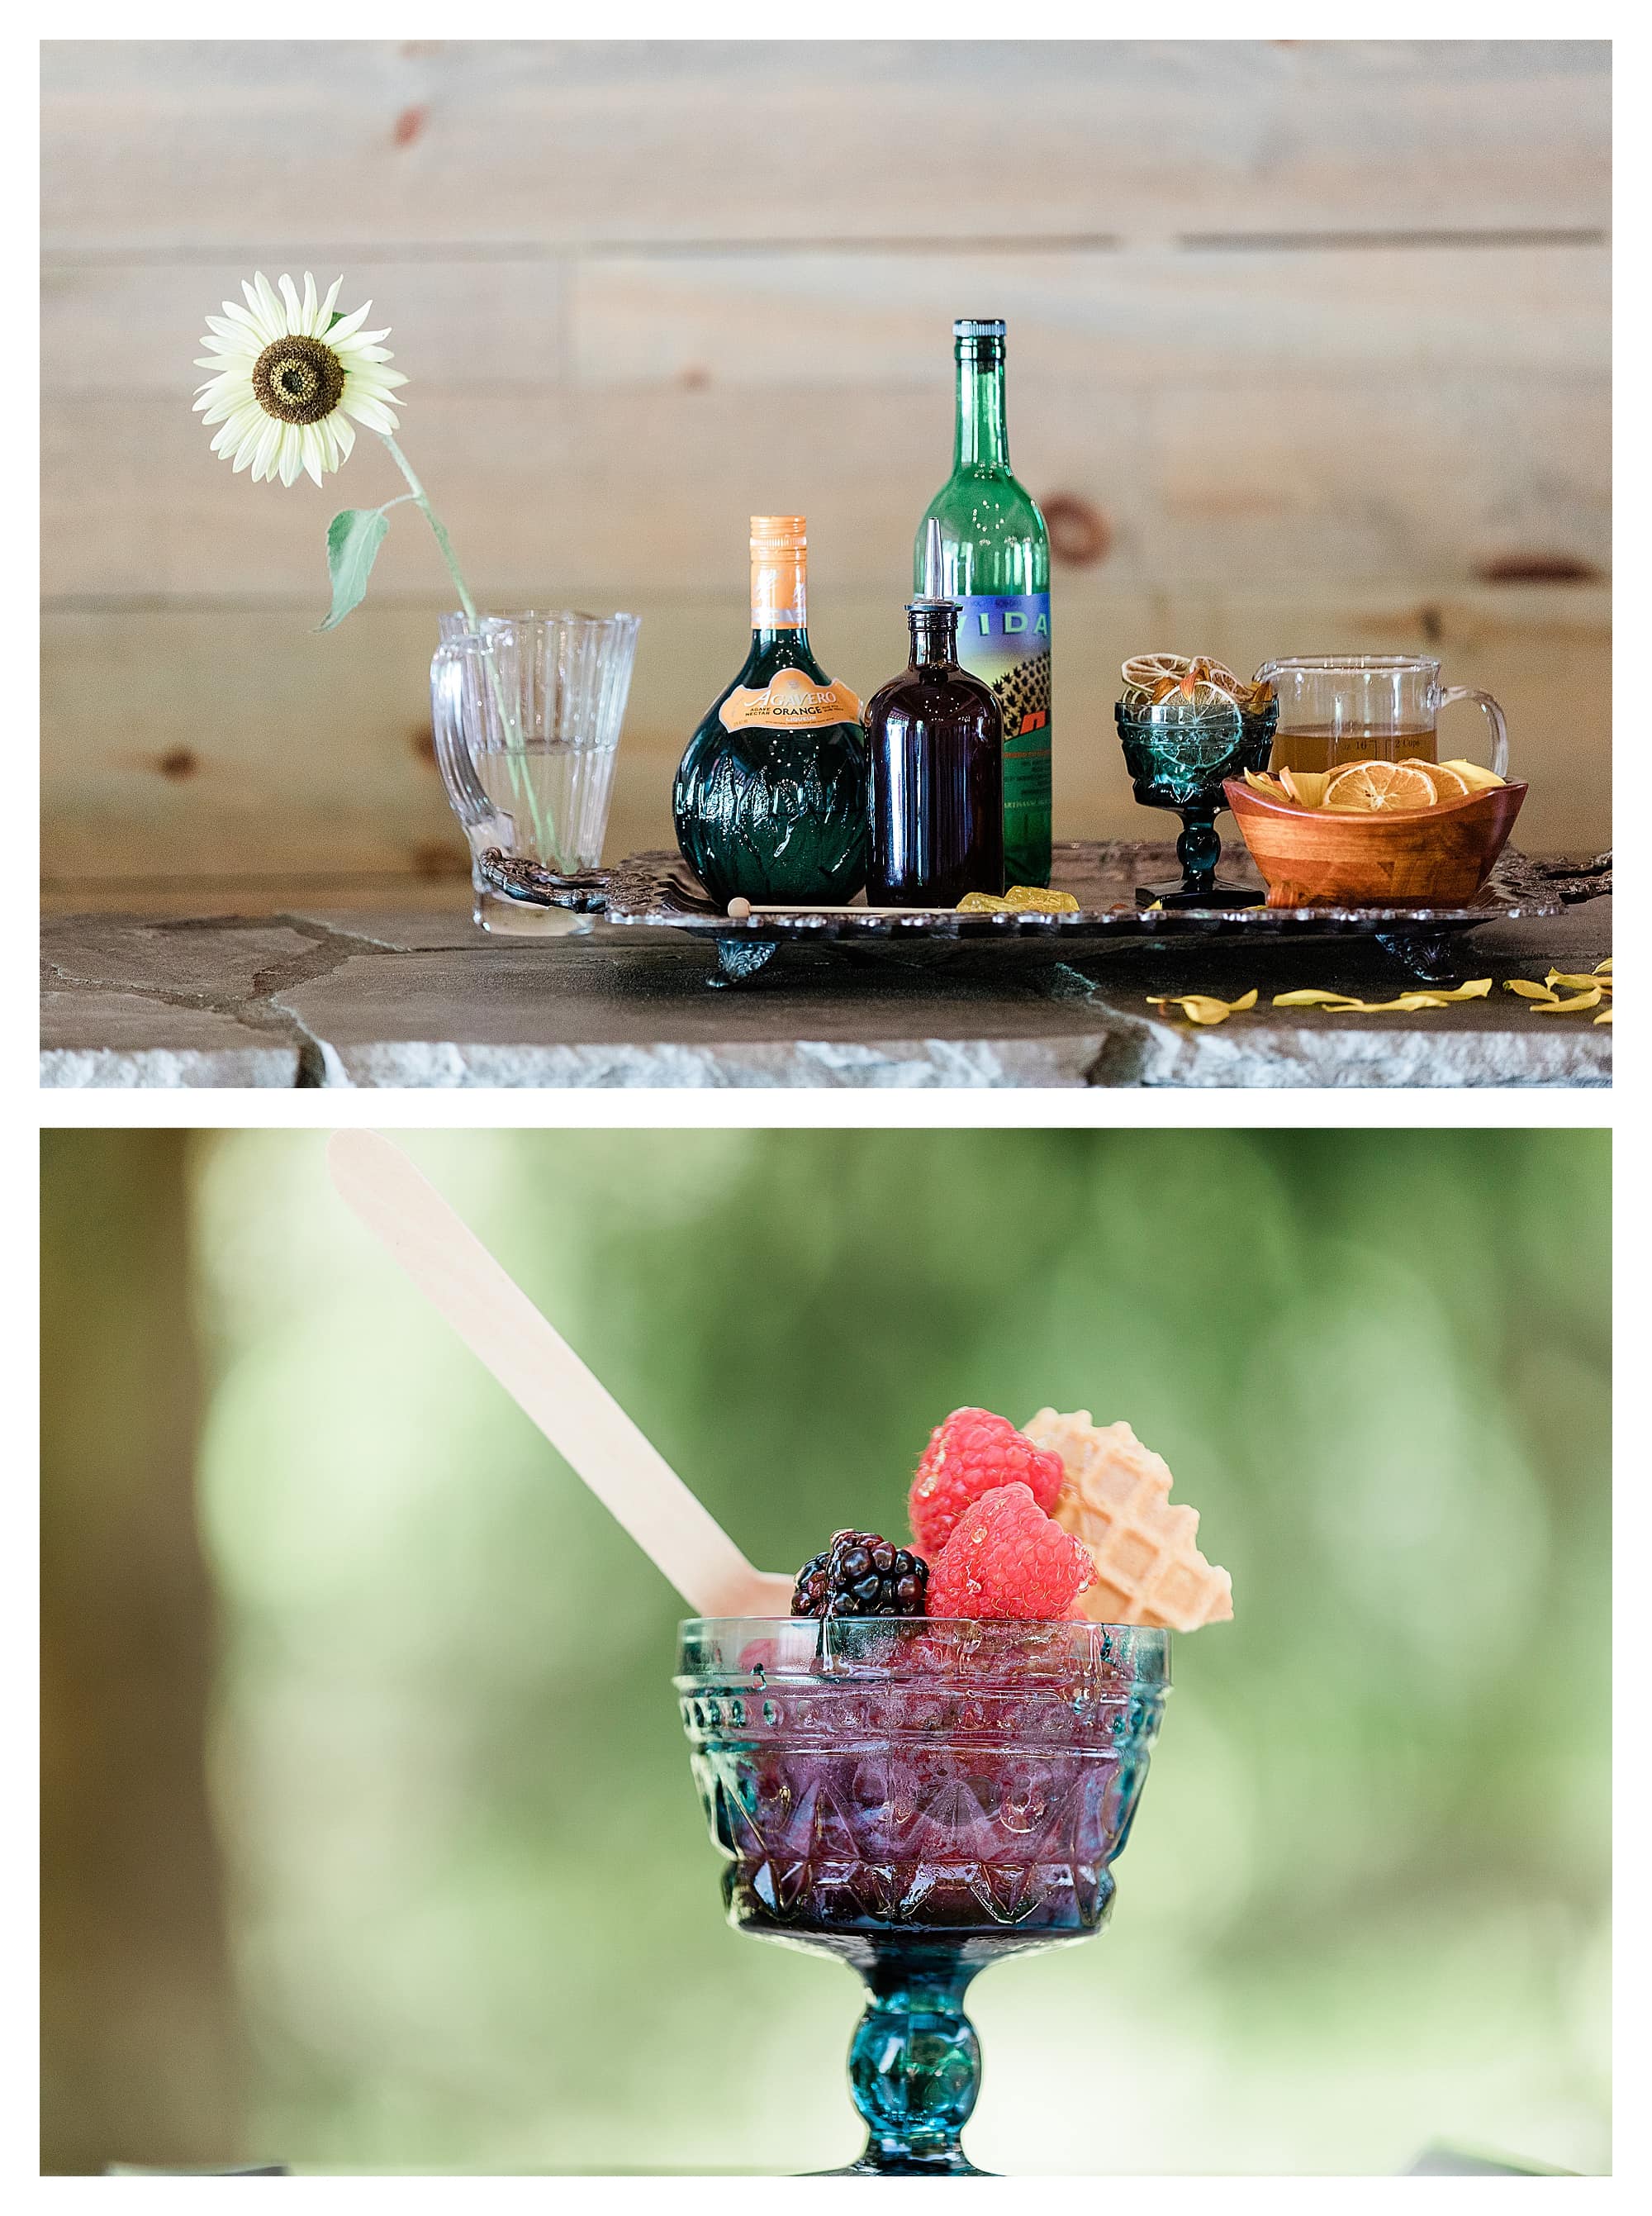 Wedding cocktail platter and berry dessert in blue glass decorative cup